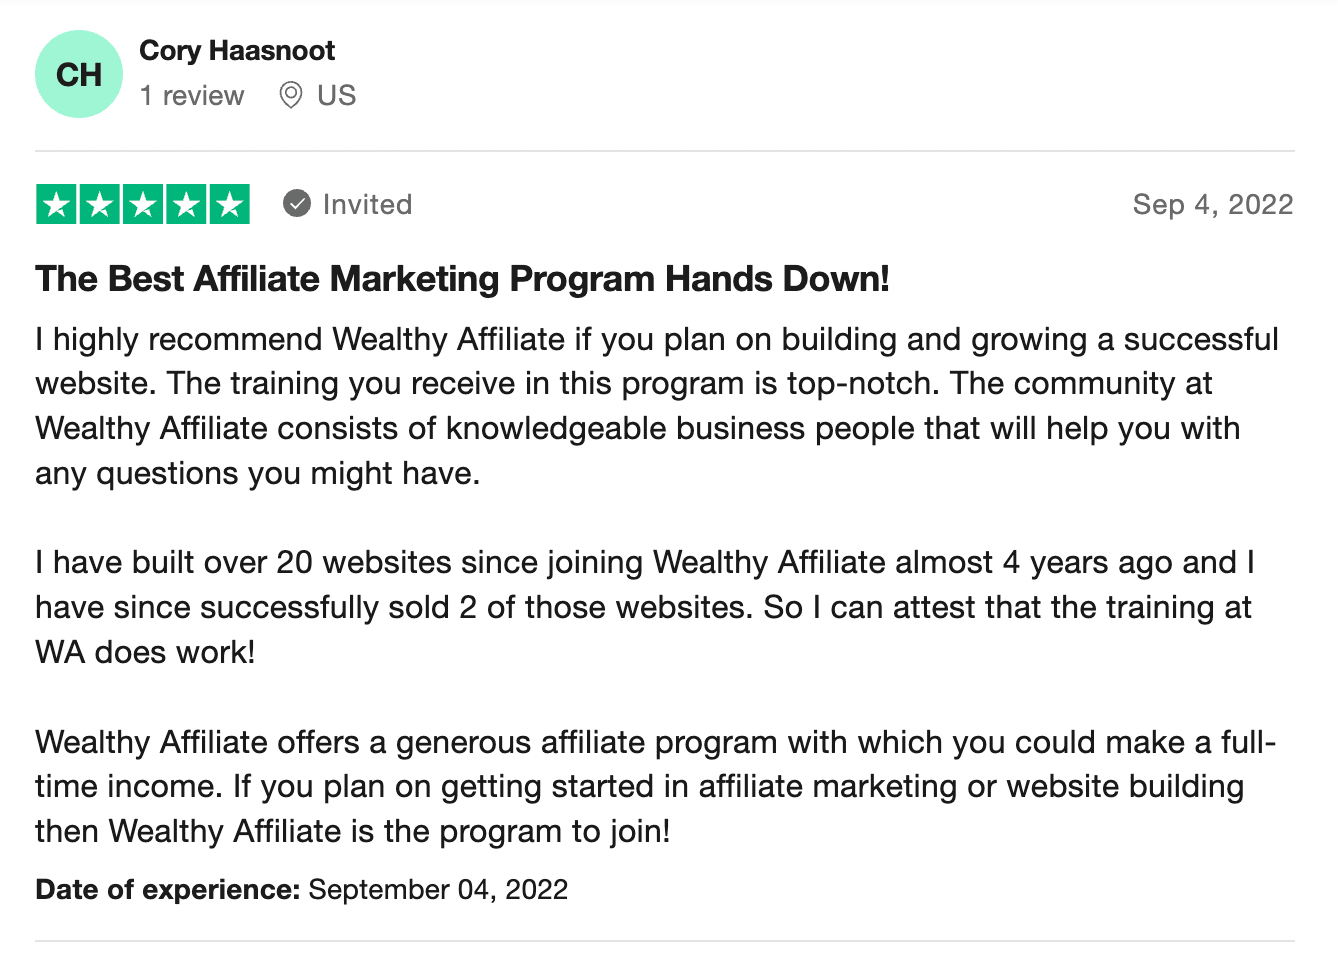 5-star review on WA